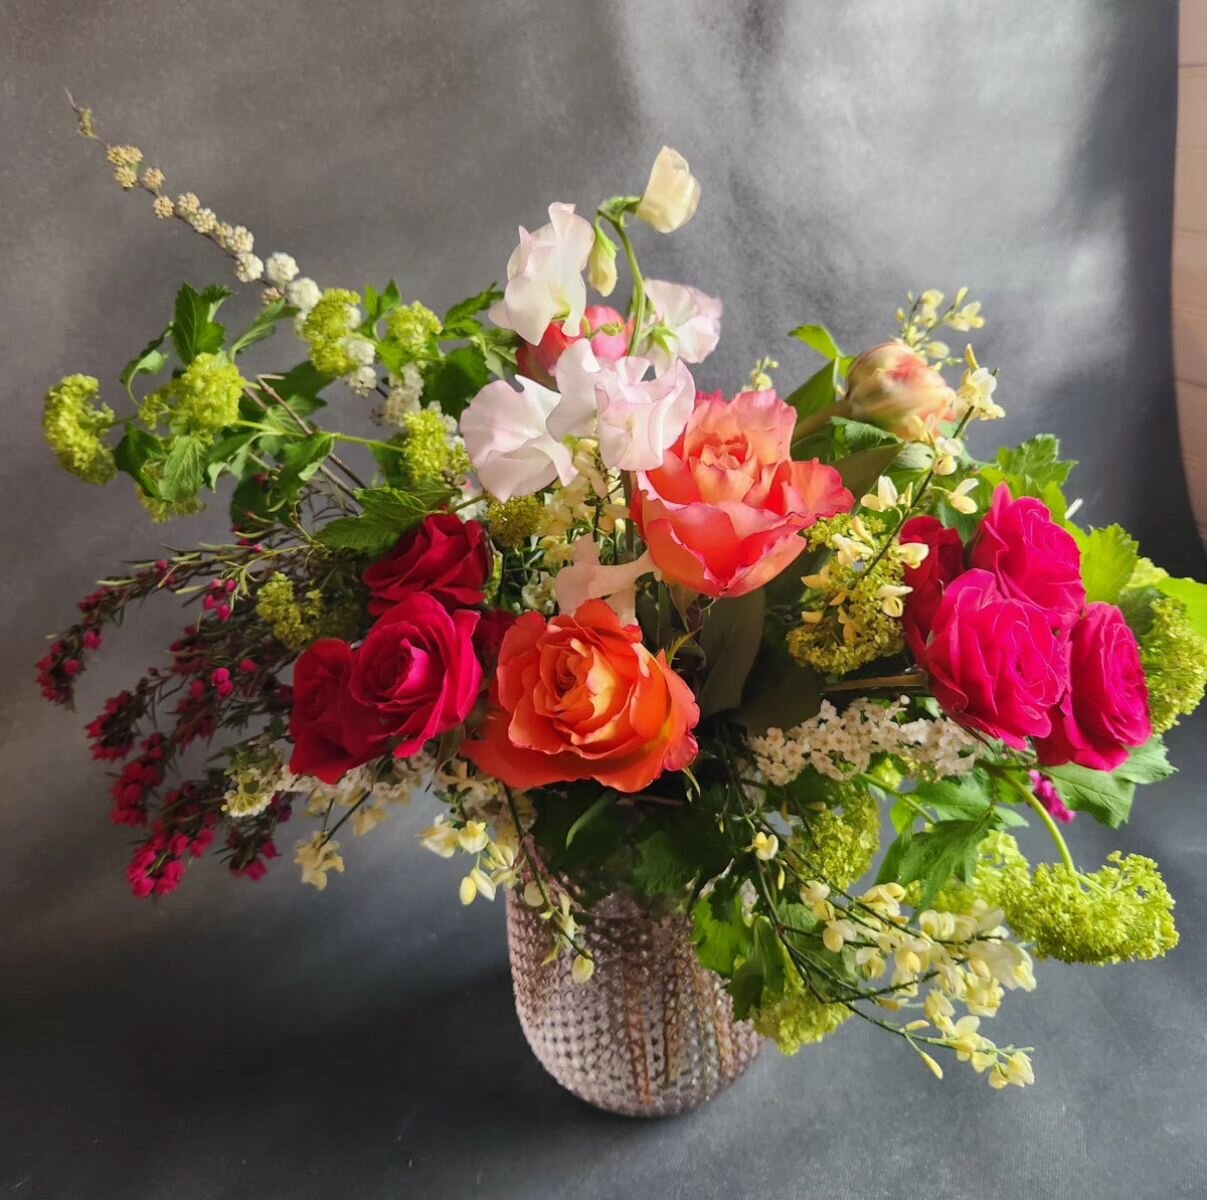 Sweetpea, roses, and blooming branches make this one perfect for Mom. Order online for delivery Tues - Sun. Pick up available as well. #mothersday #freshflowers #sweetpea #elmerflorist